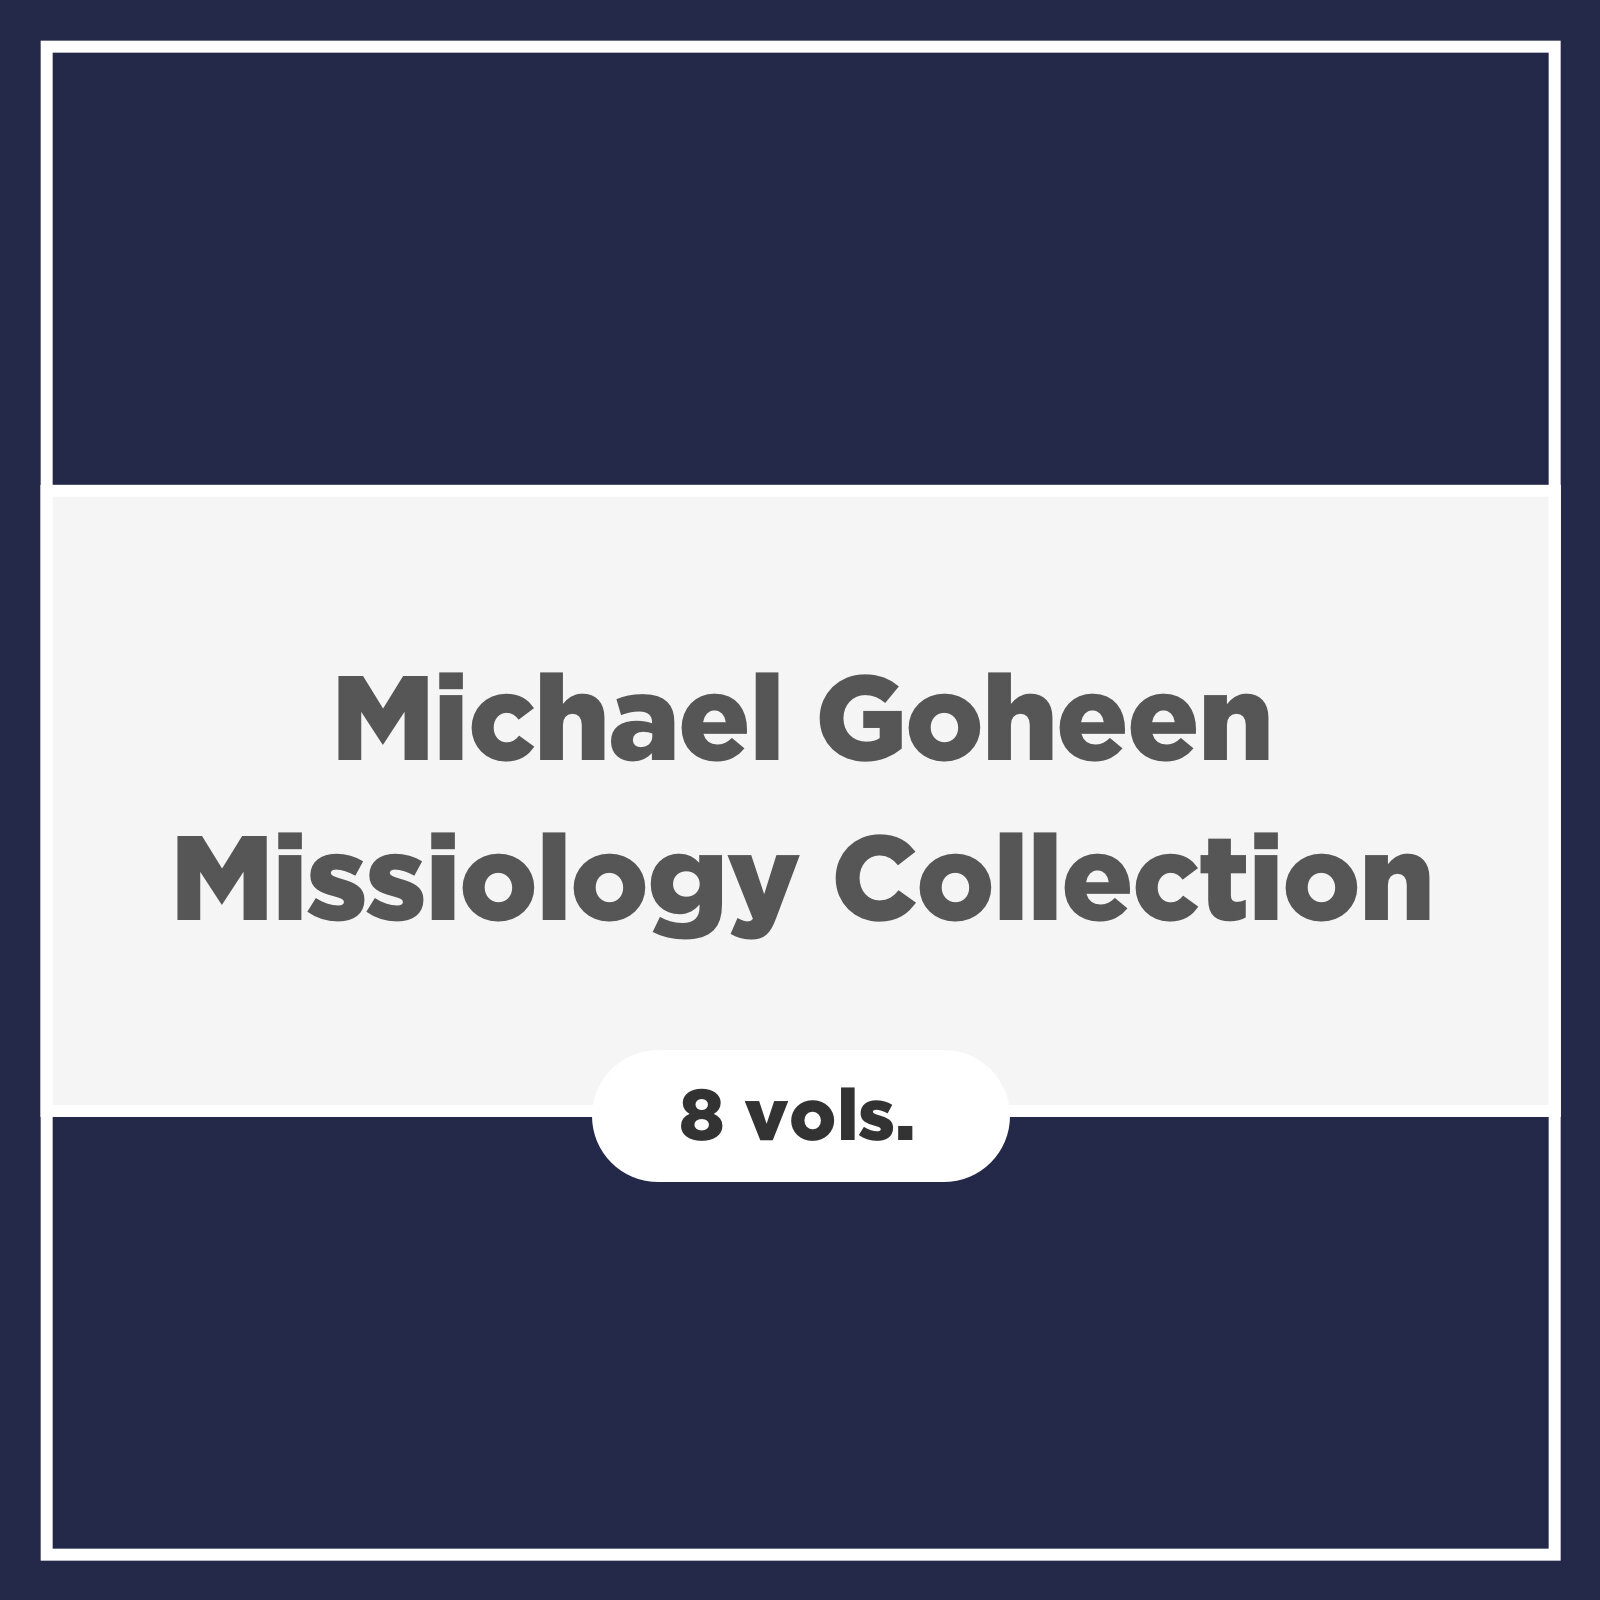 Michael Goheen Missiology Collection (8 vols.)